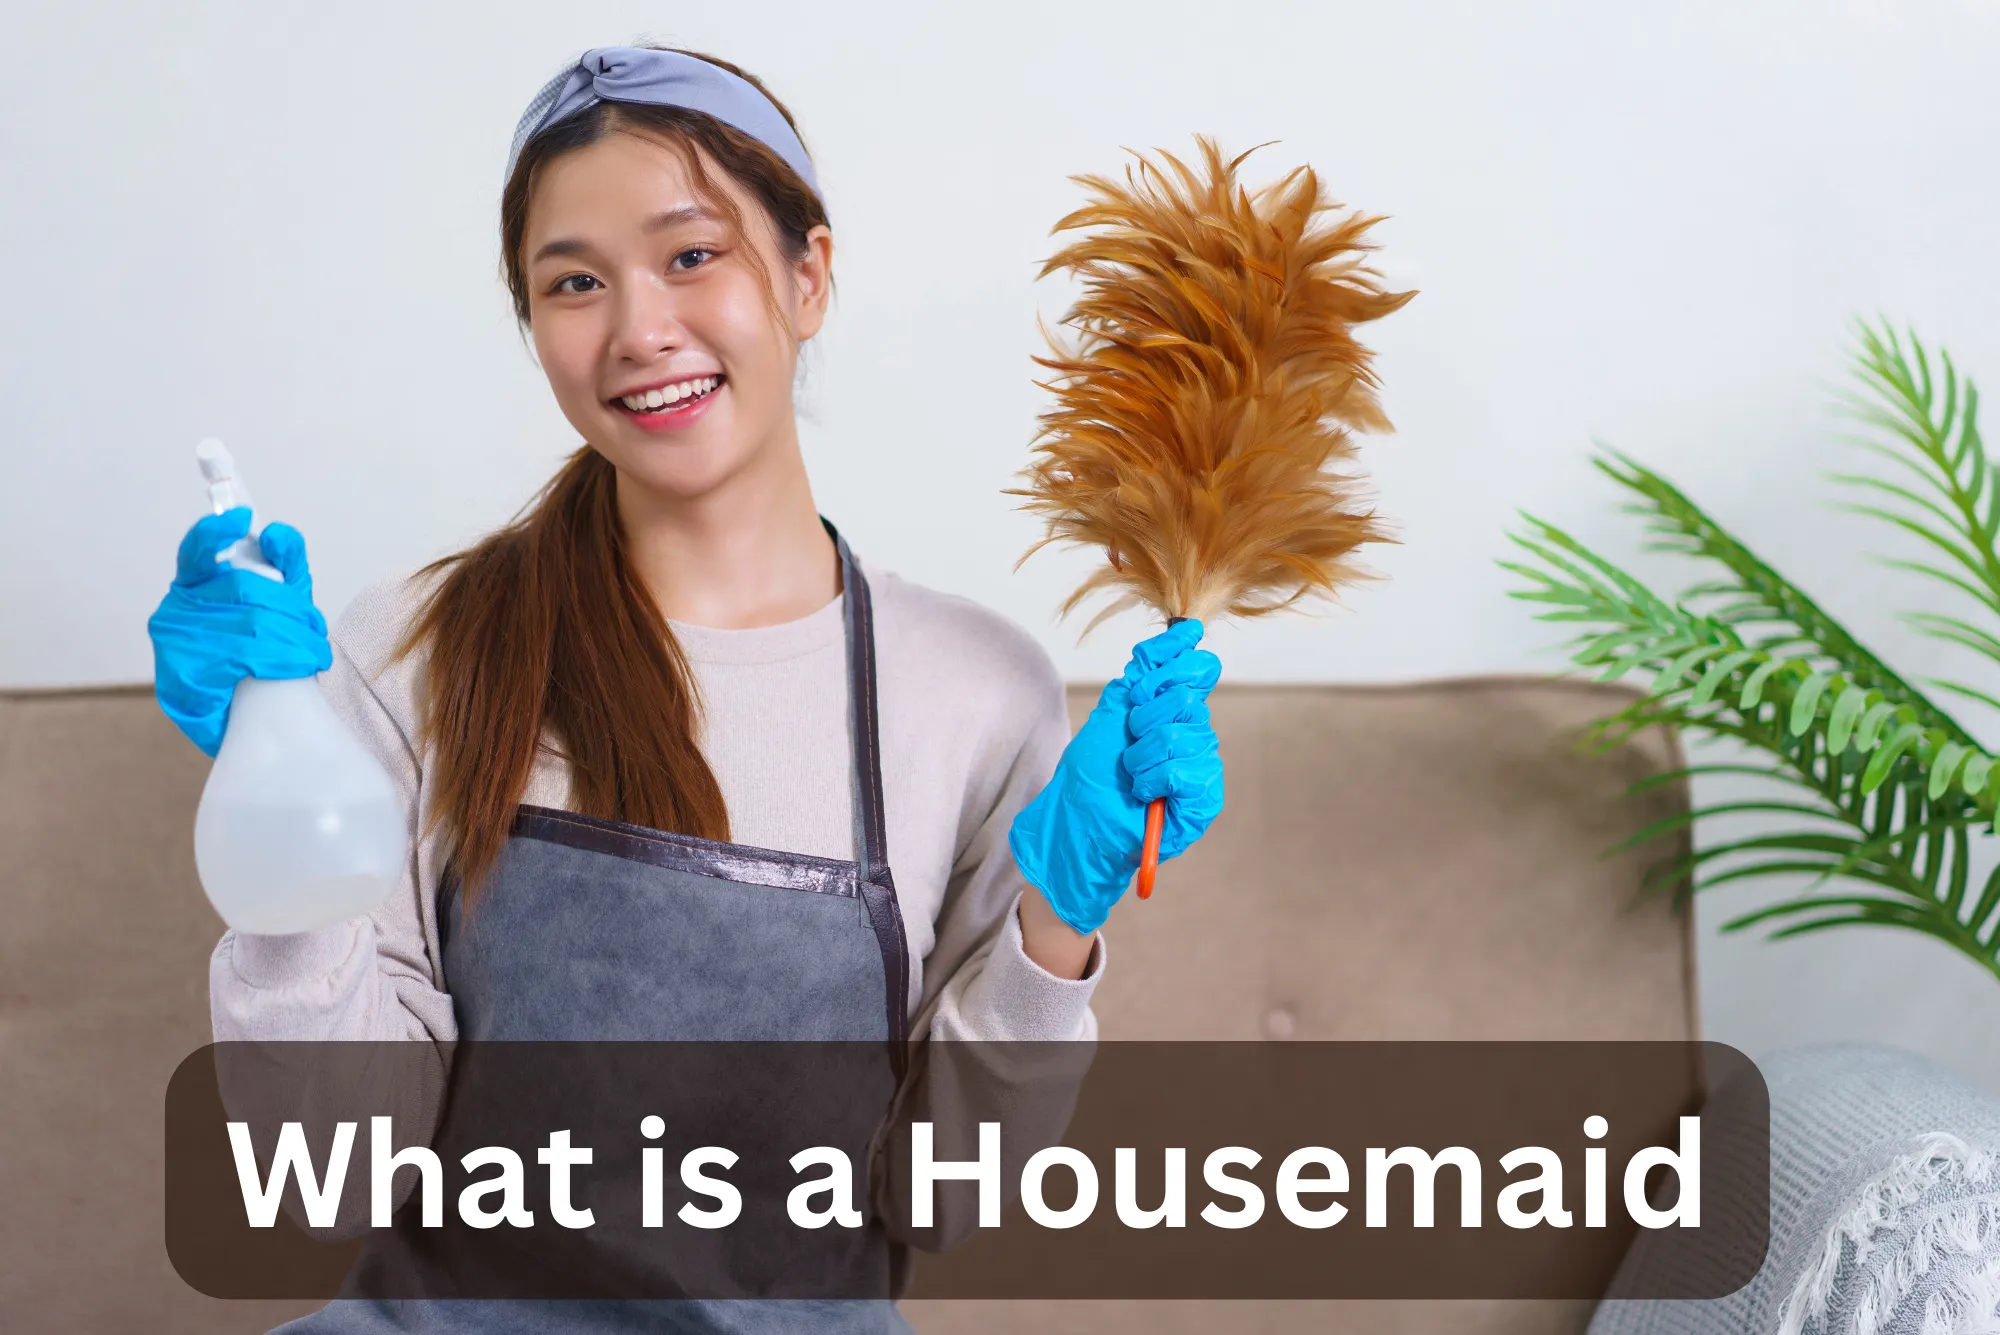 What is a Housemaid